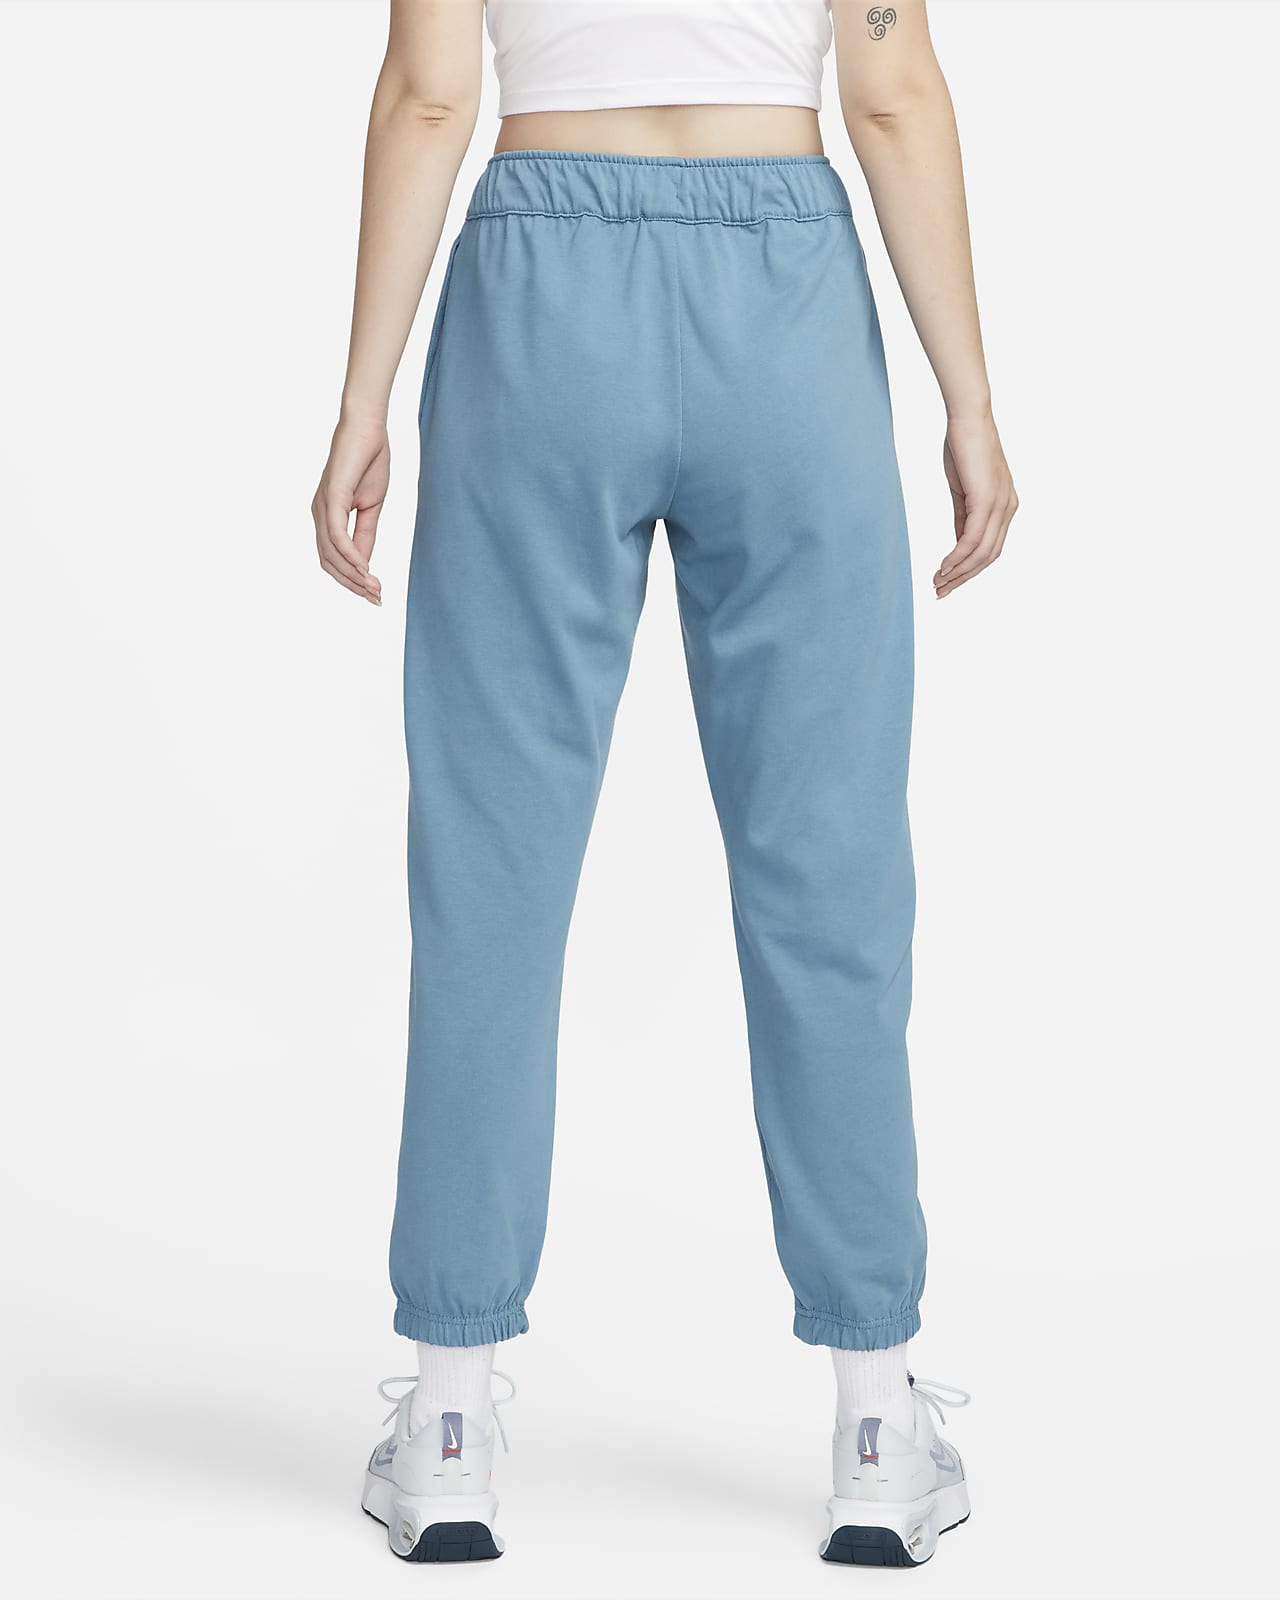 Pacific Relaxed Fit Joggers in Cerulean